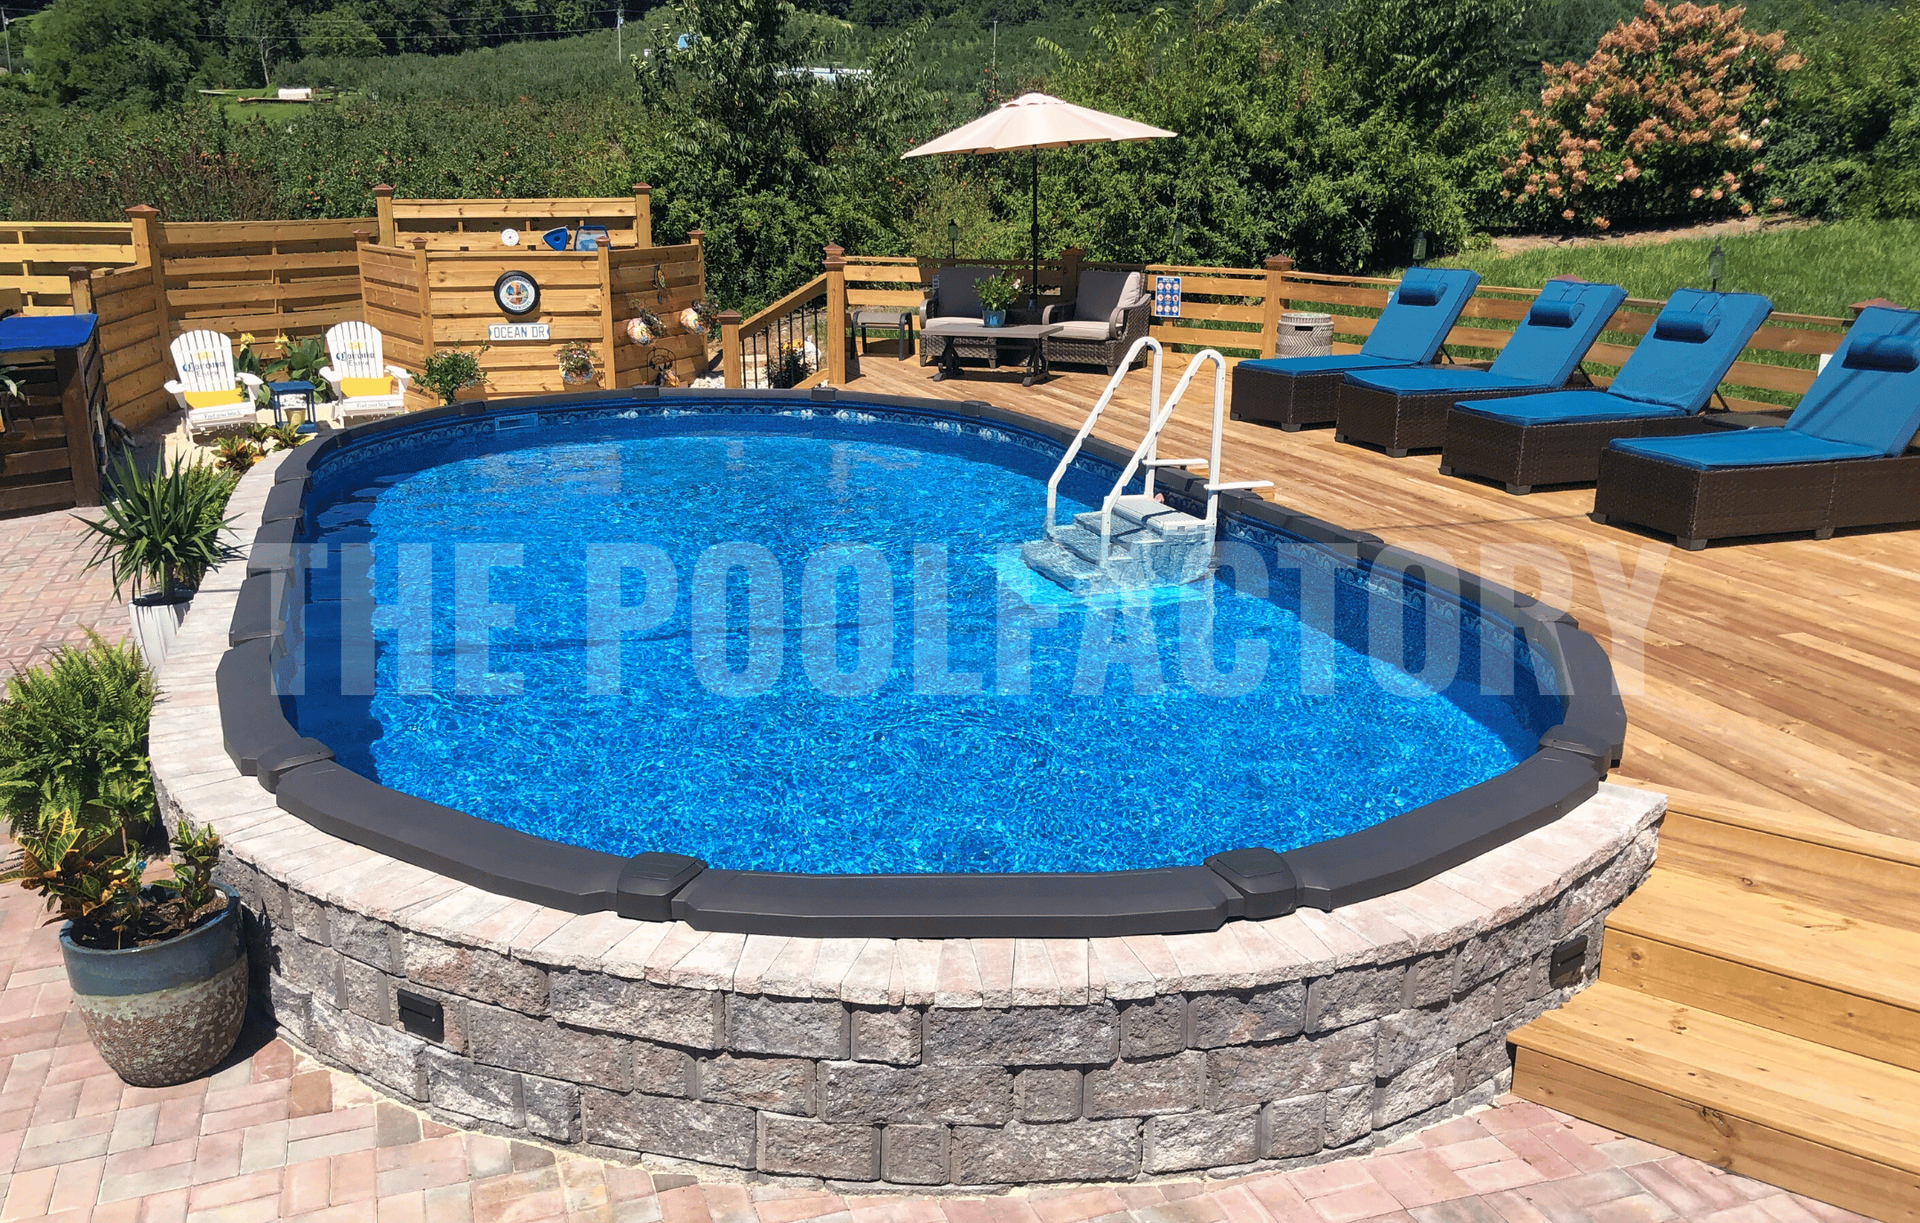 crystal-clear-above-ground-pool-water-maintenance-lx.png__PID:29deb8c8-4aea-4f37-8993-06736d3dbe1b